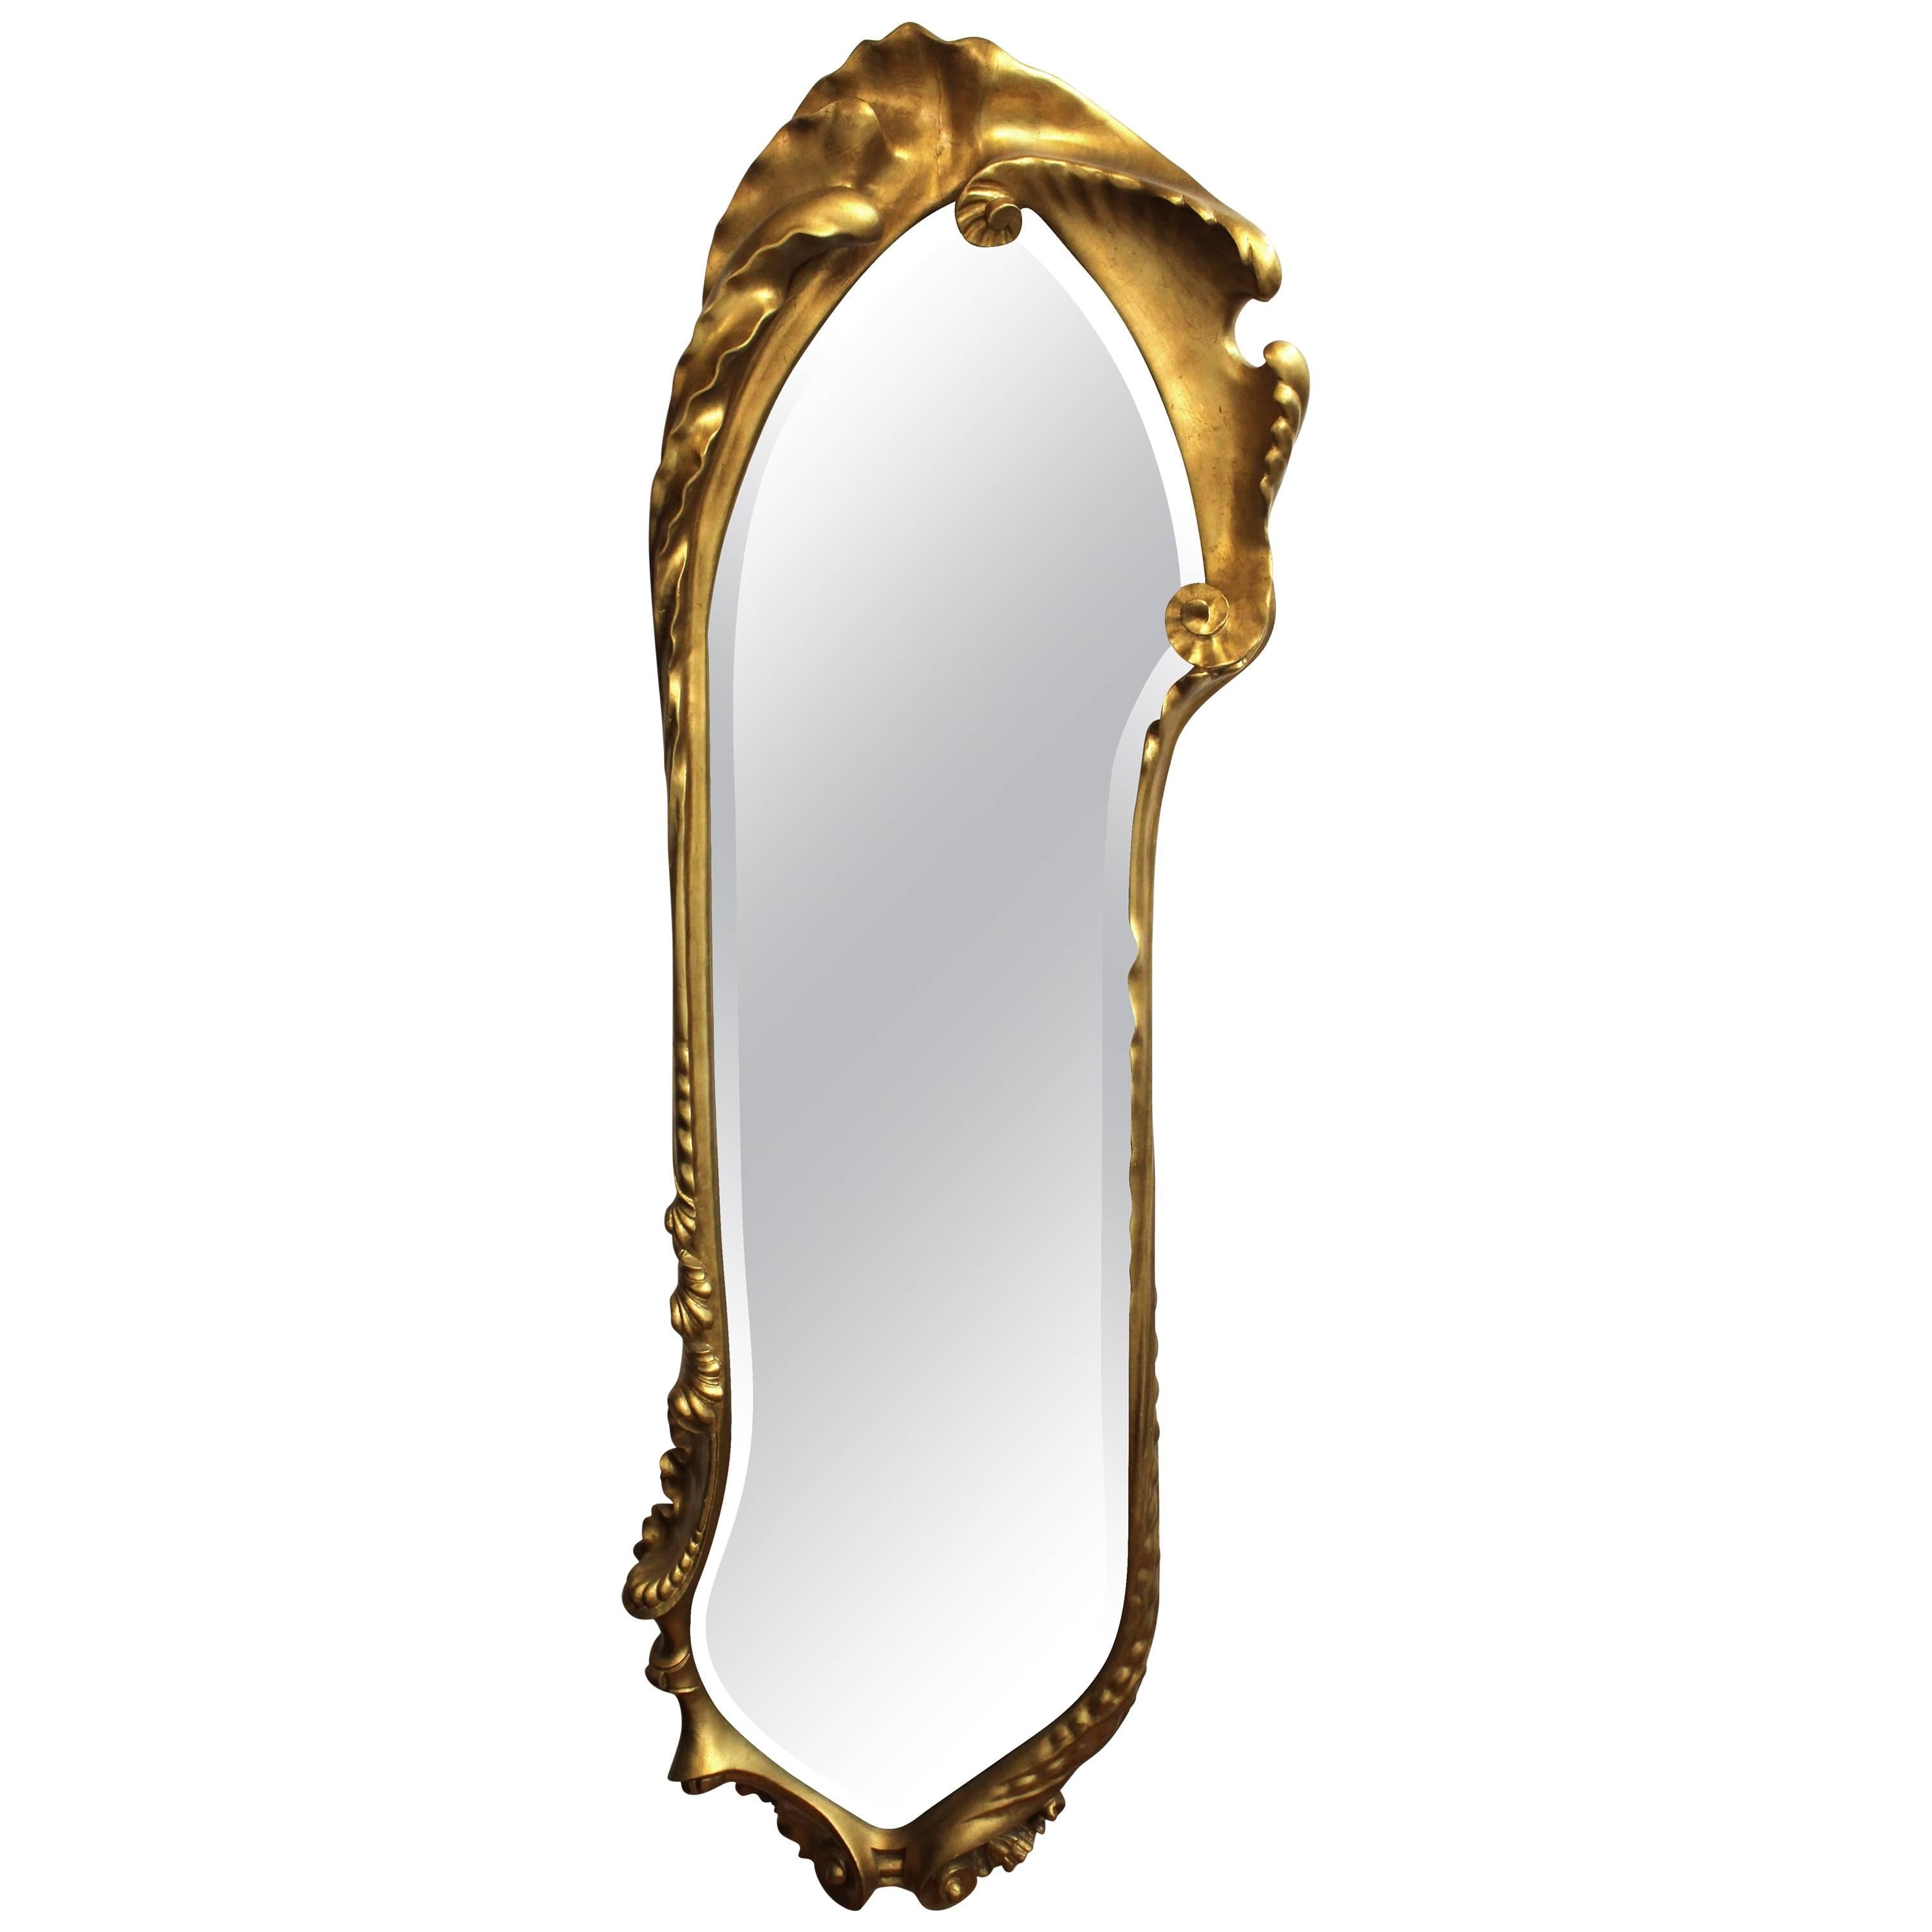 Monumental Full-Length Wall Mirror in Carved Giltwood Frame